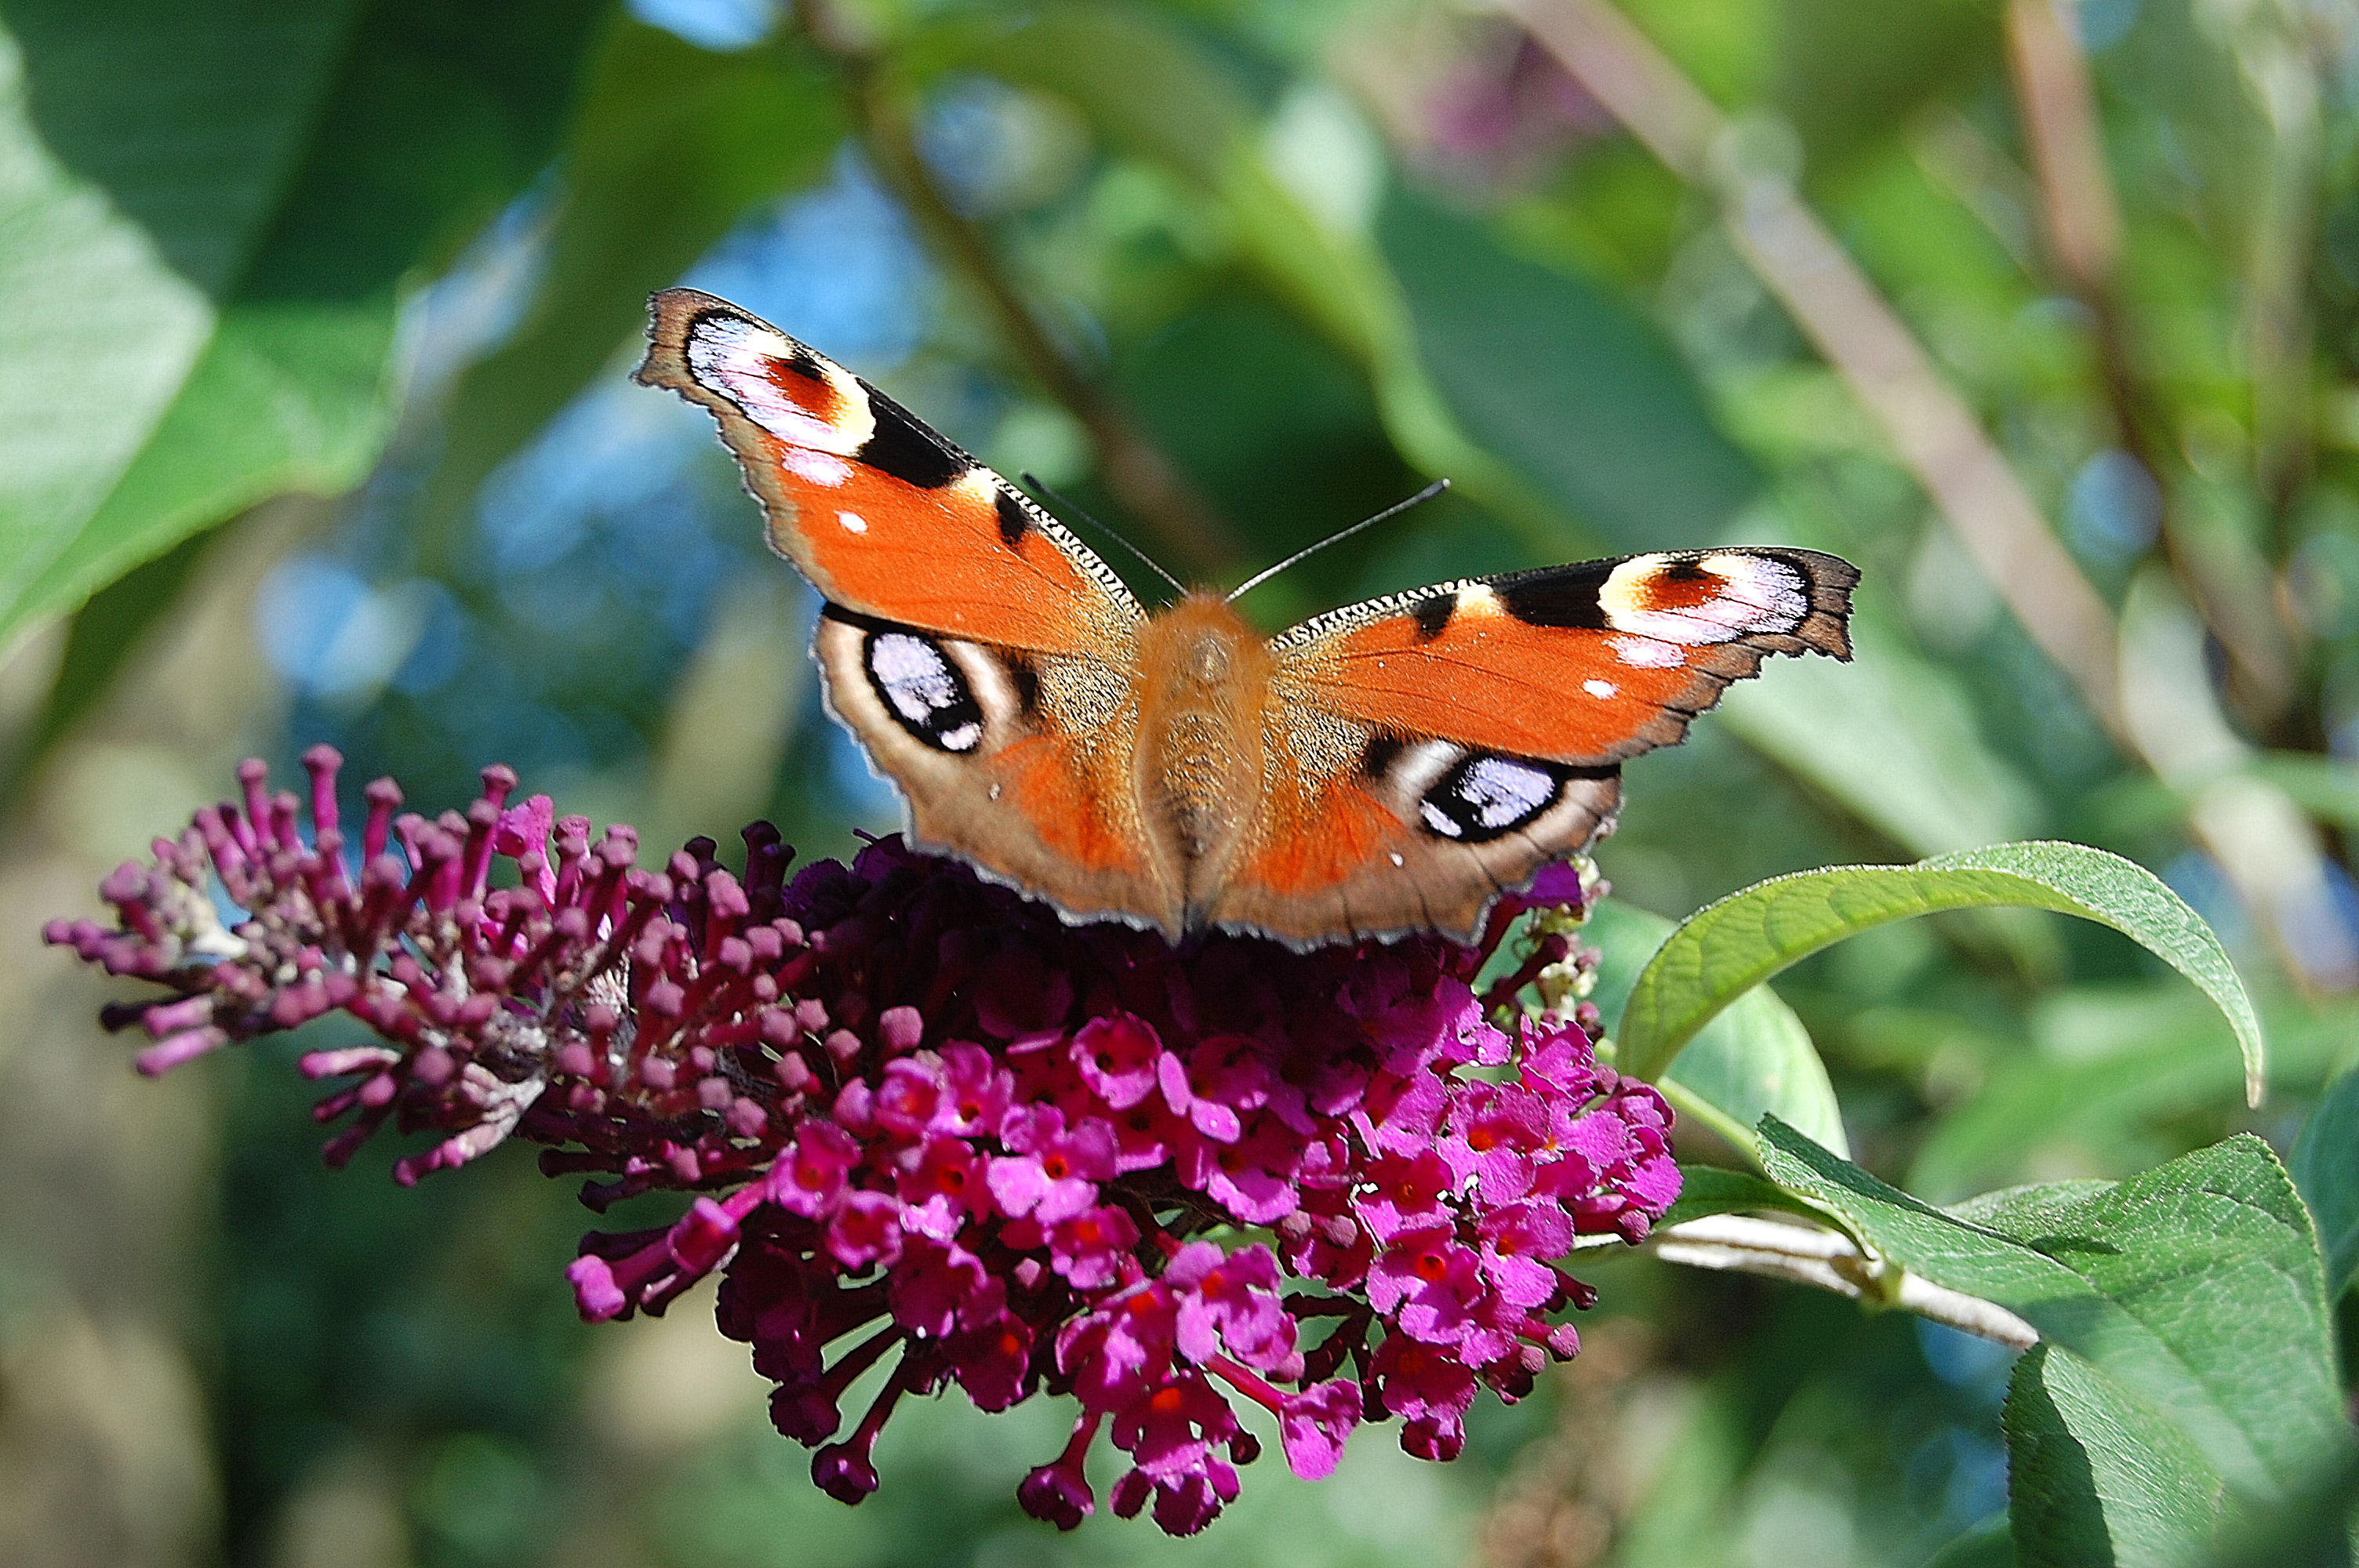 Flickr - ronsaunders47 - THE PEACOCK BUTTERFLY.